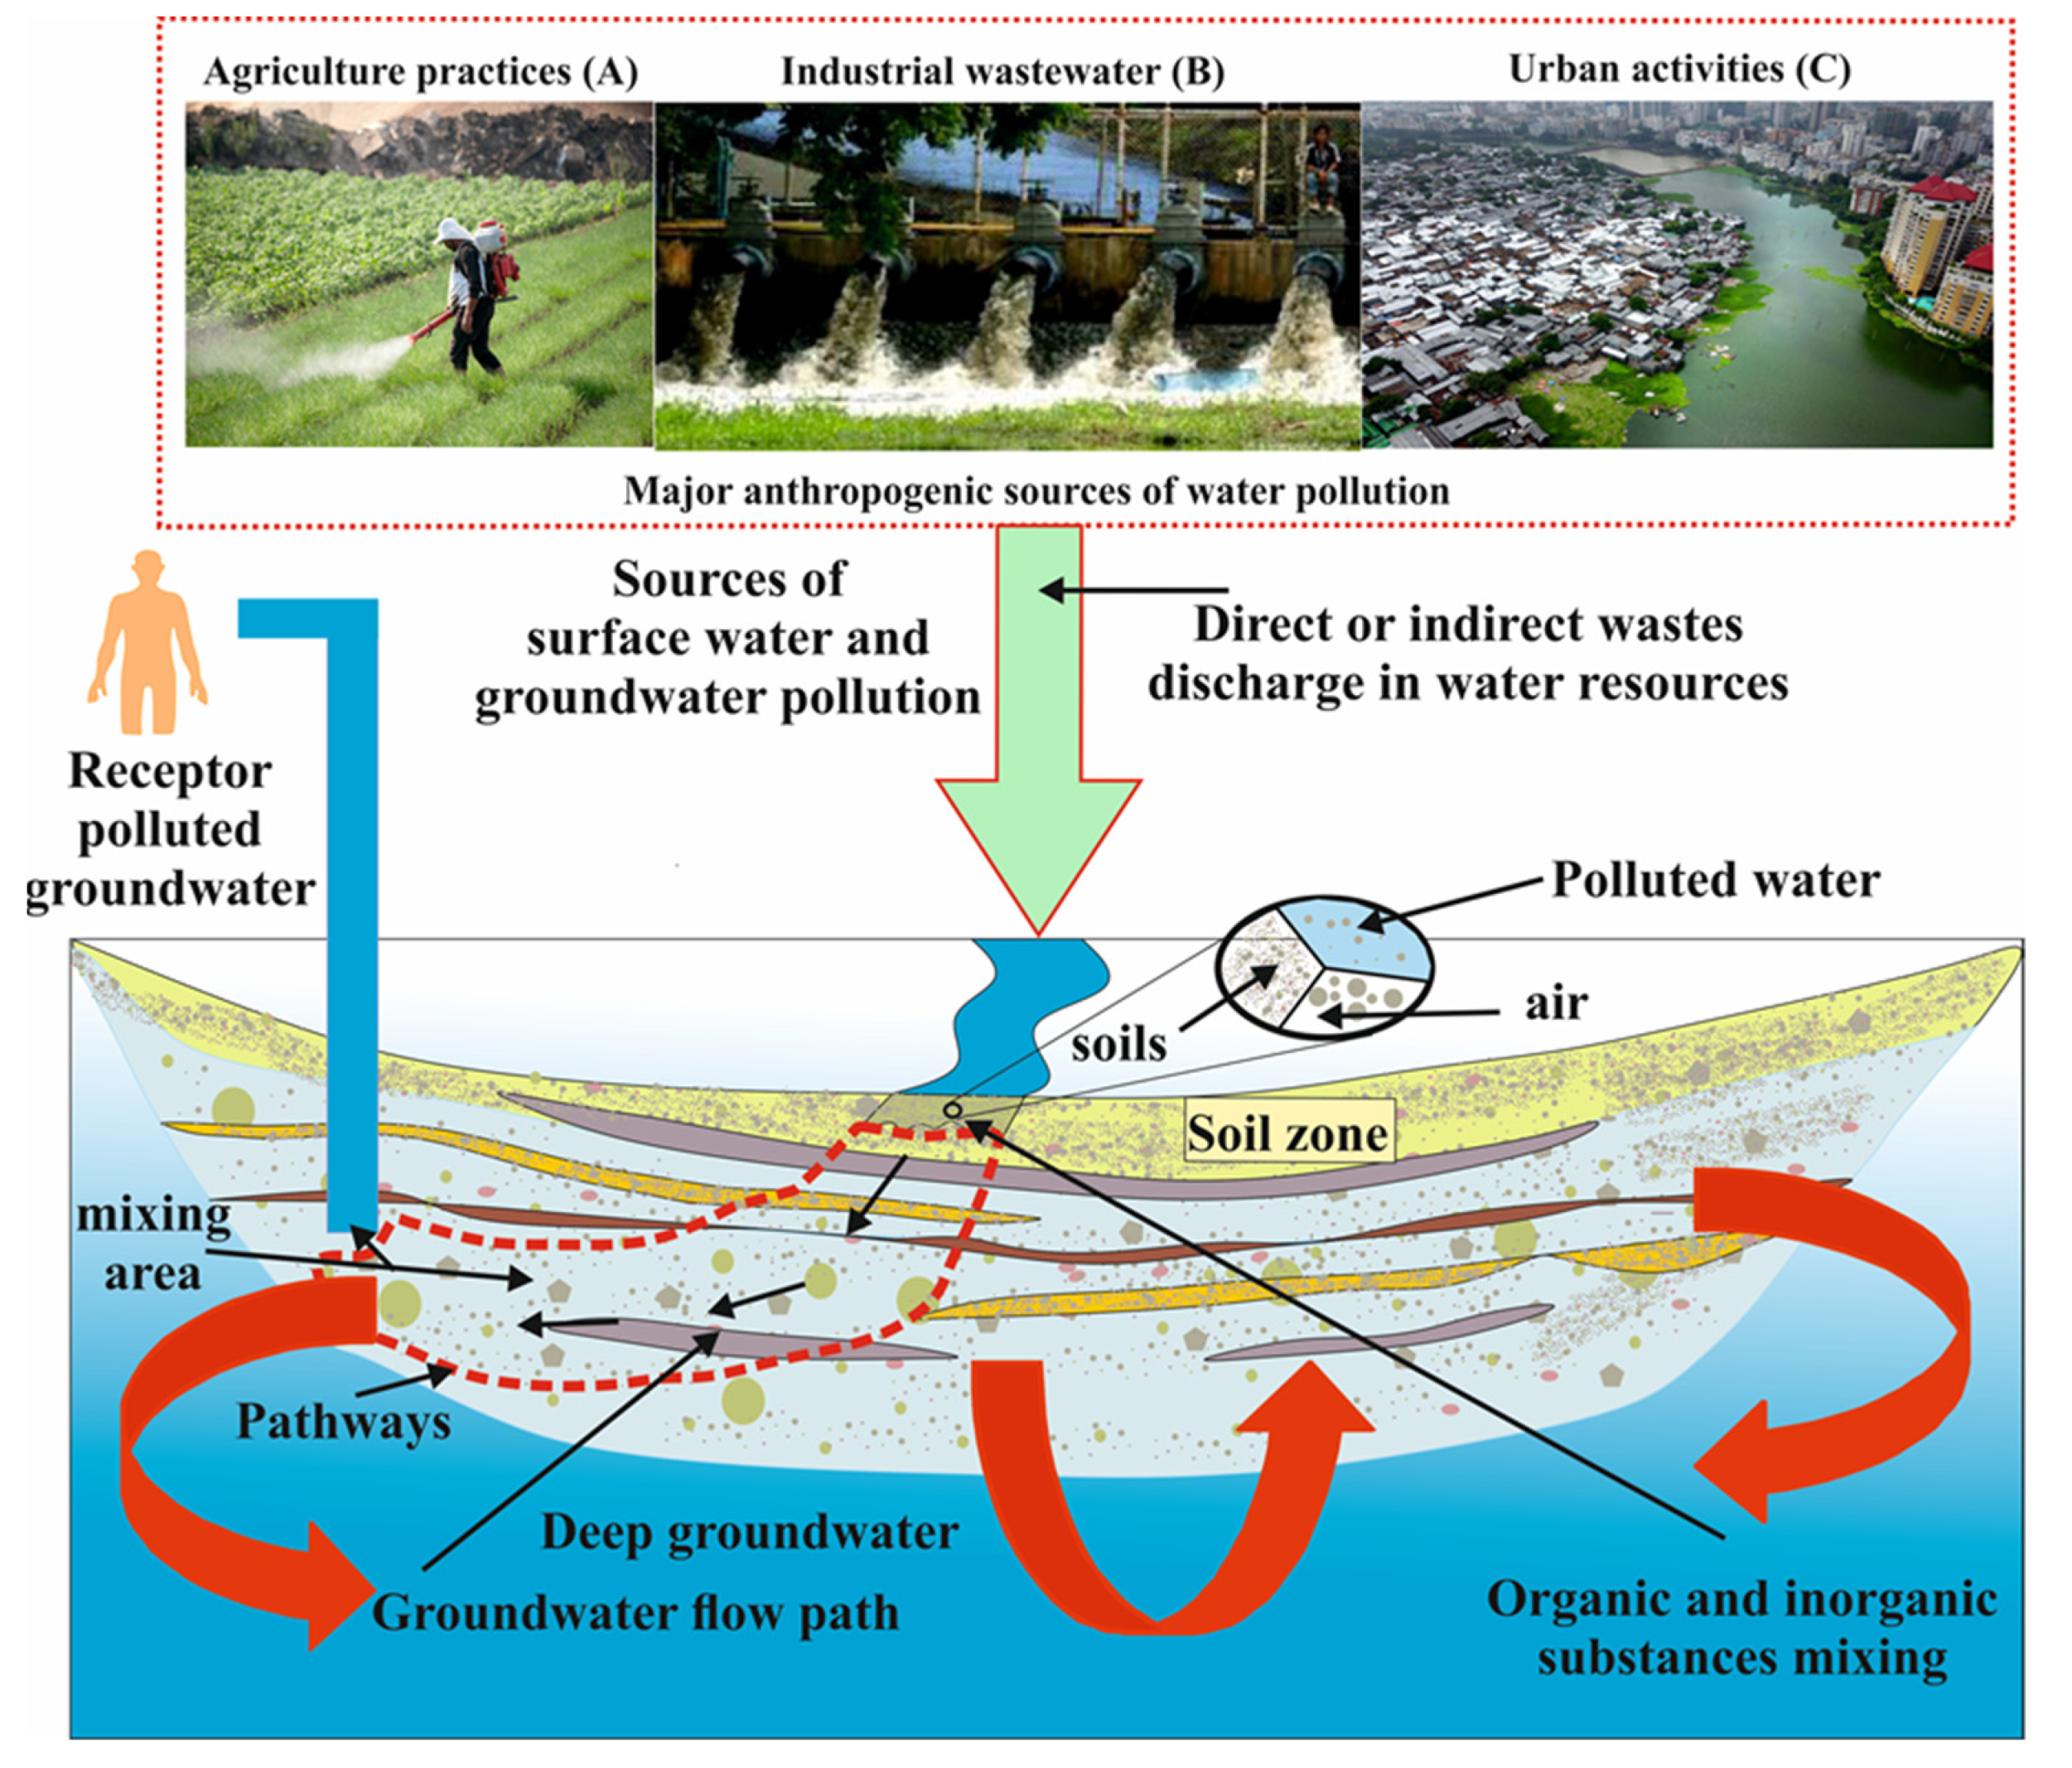 Innovative sewage solutions: Tackling the global human waste problem